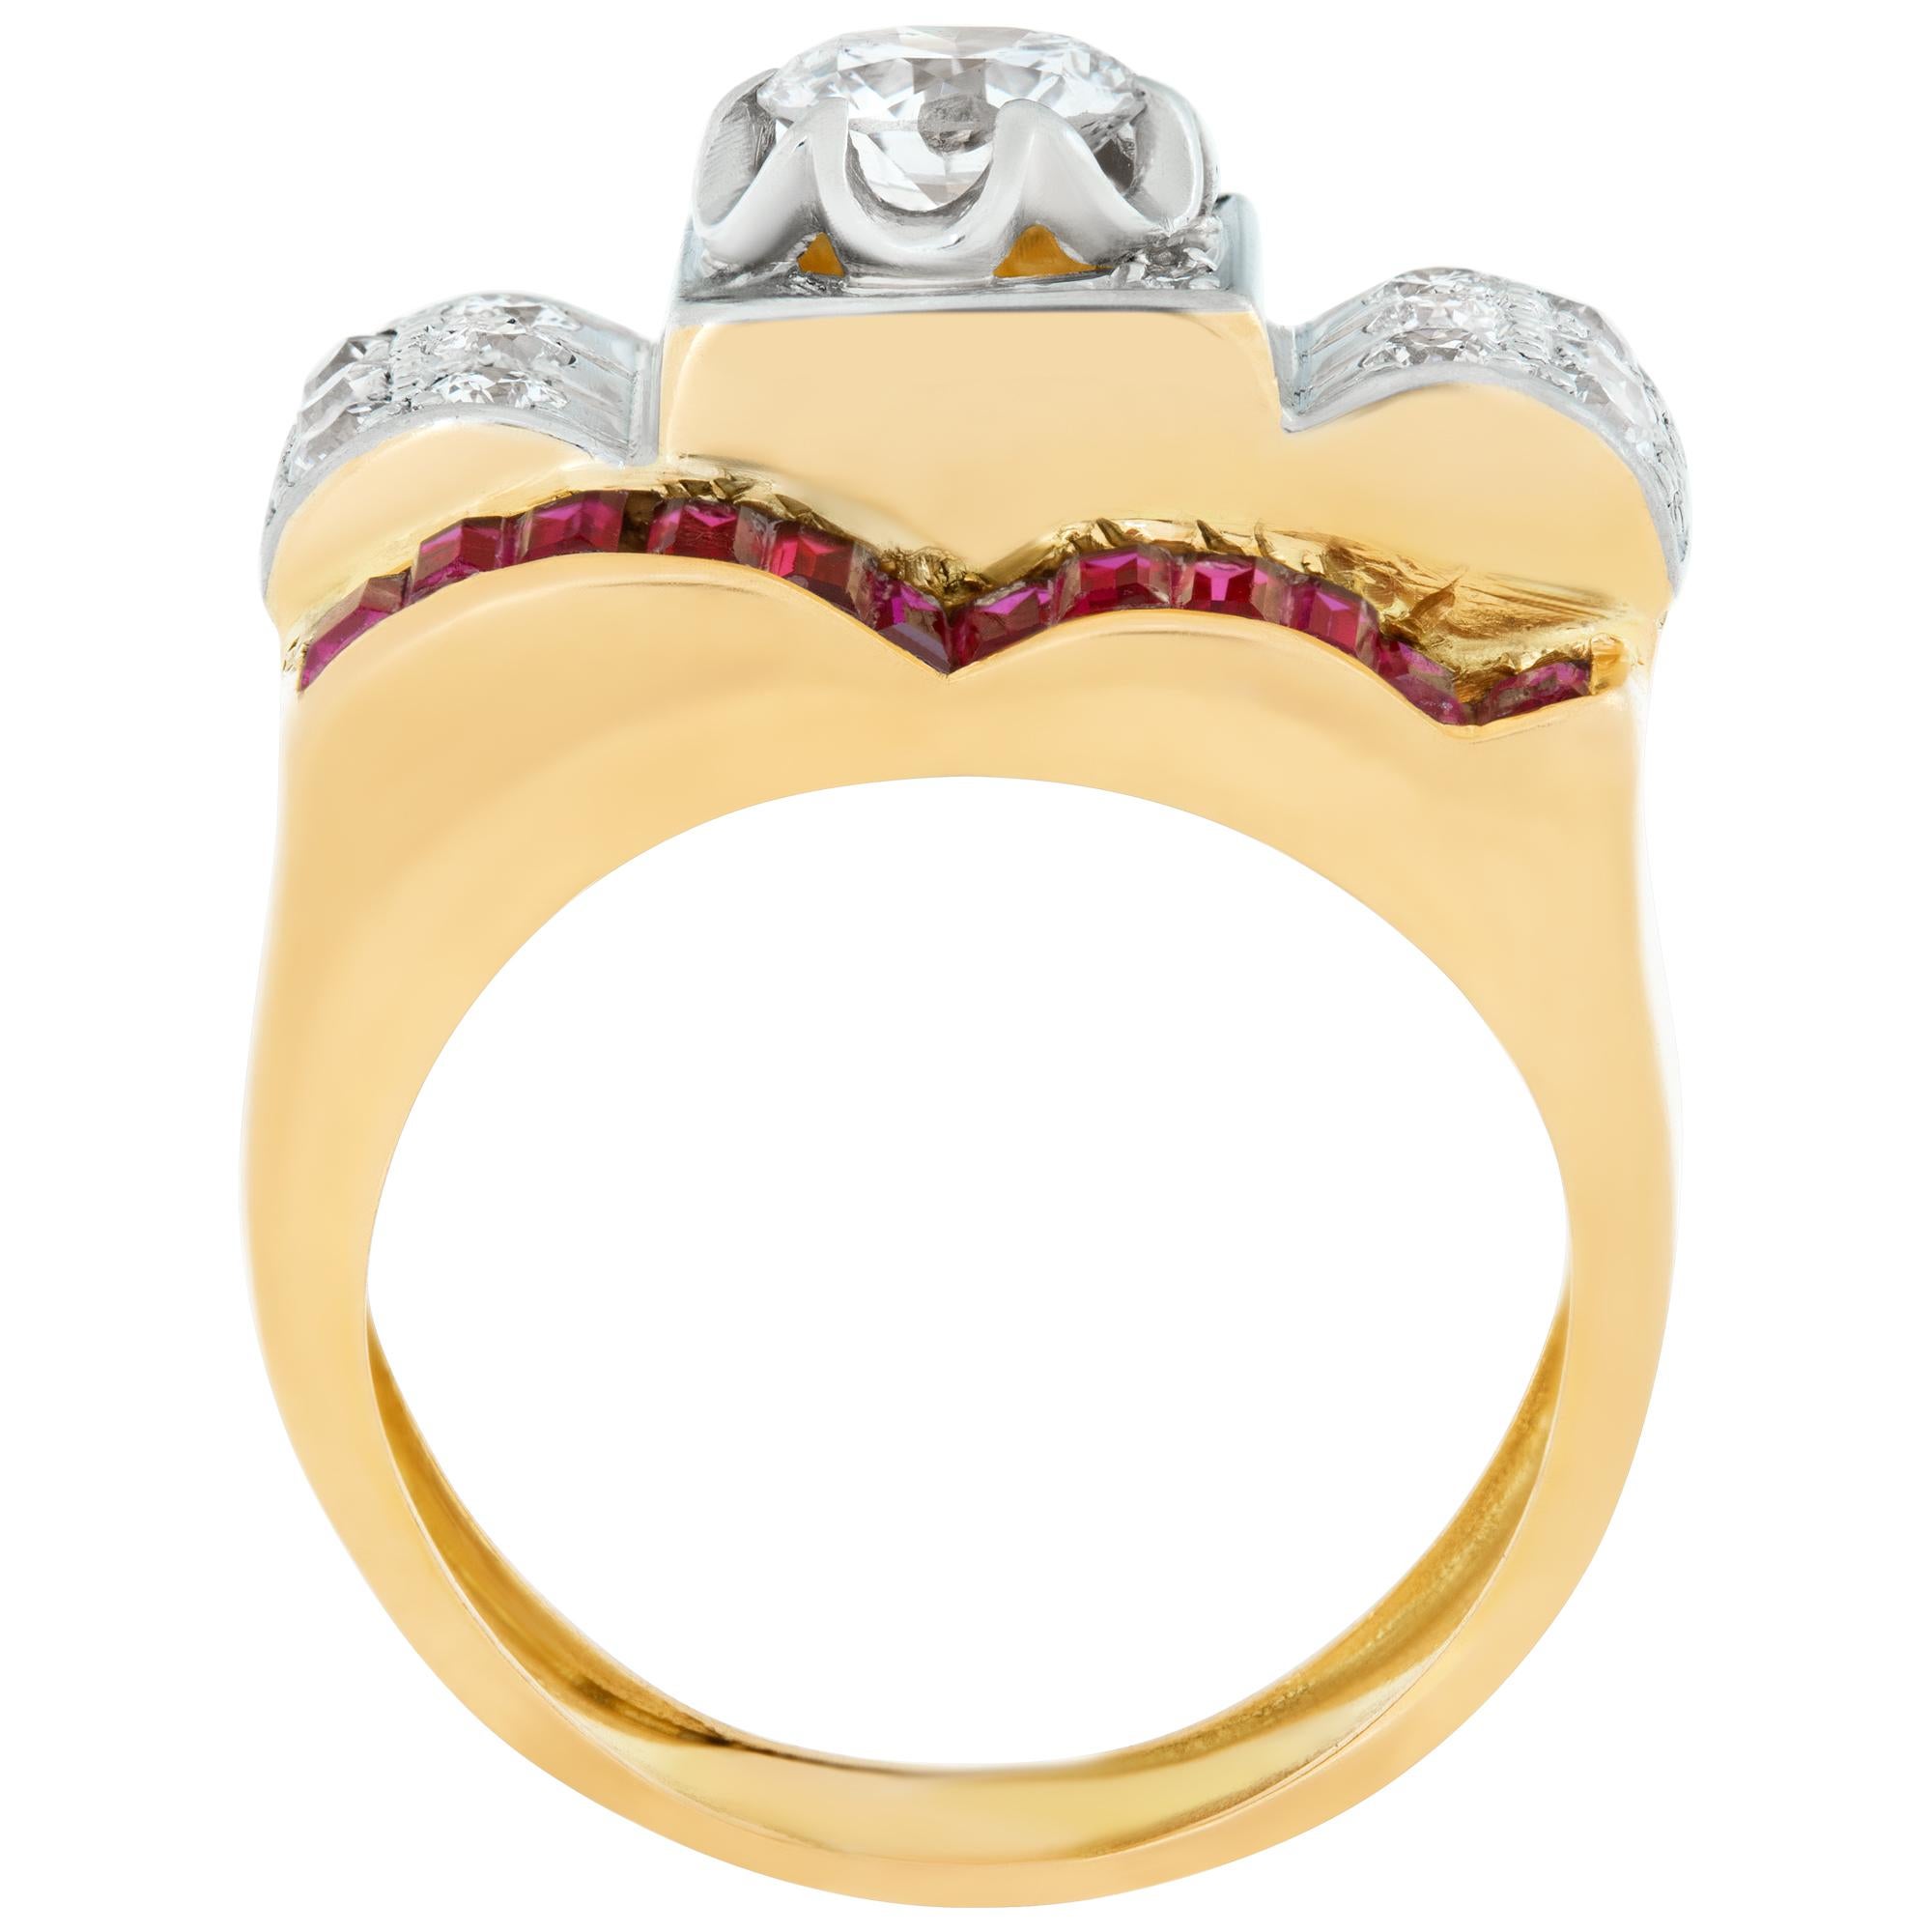 Women's or Men's Mens 18k Yellow Gold Diamond Ring with Rubies For Sale